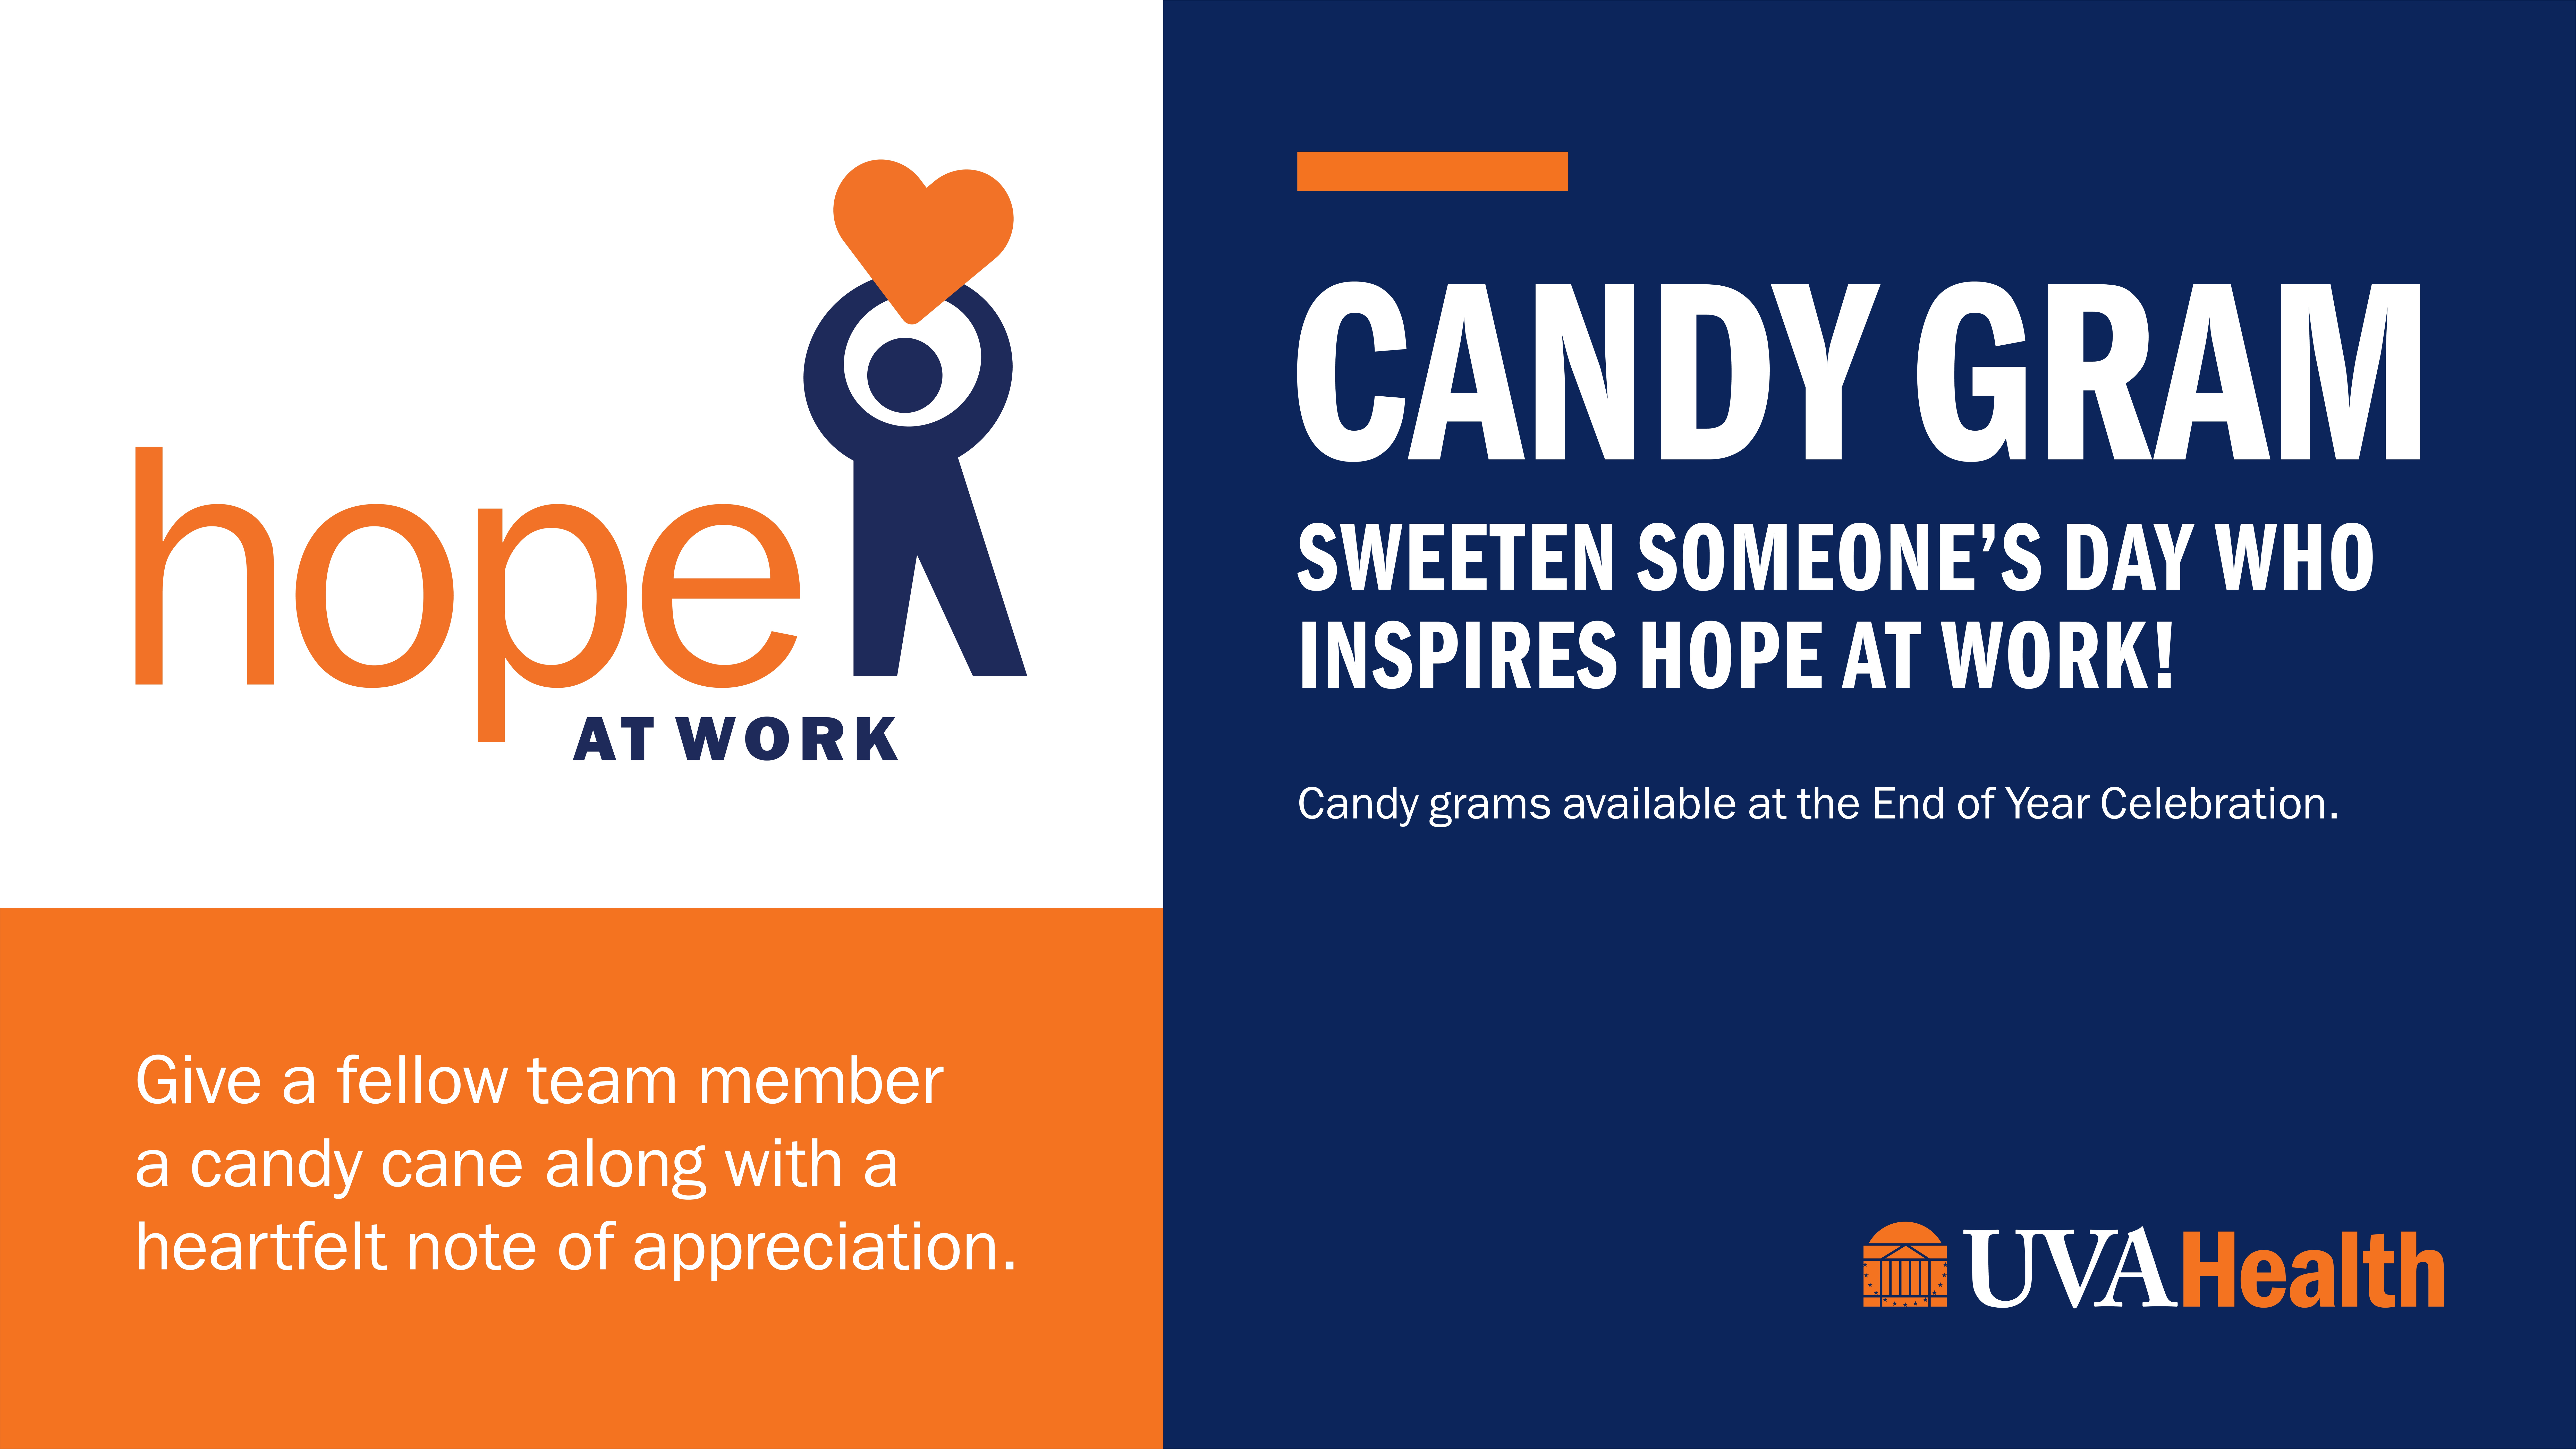 Candy Gram
Sweeten someone’s day who inspires hope at work! Candy Grams available at the End-of-Year Celebration. Give a fellow team member a candy cane along with a heartfelt note of appreciation.